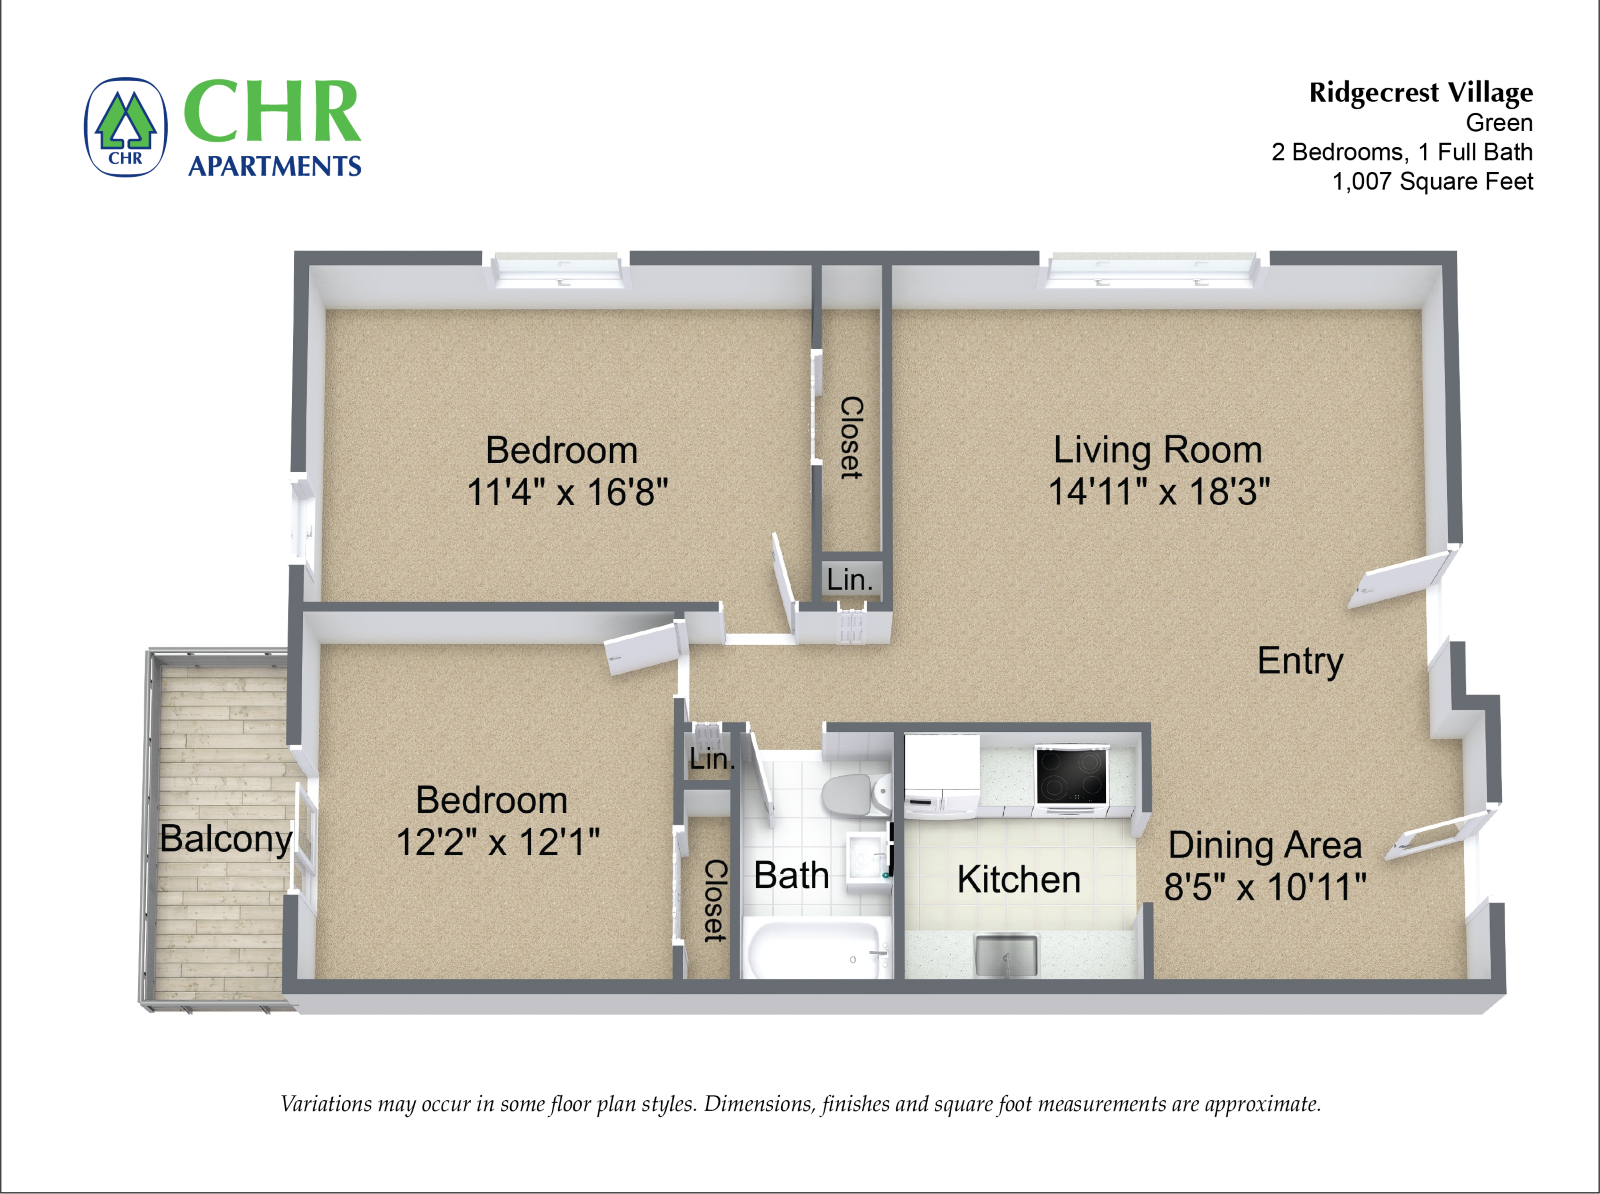 Click to view 2 Bed/1 Bath floor plan gallery